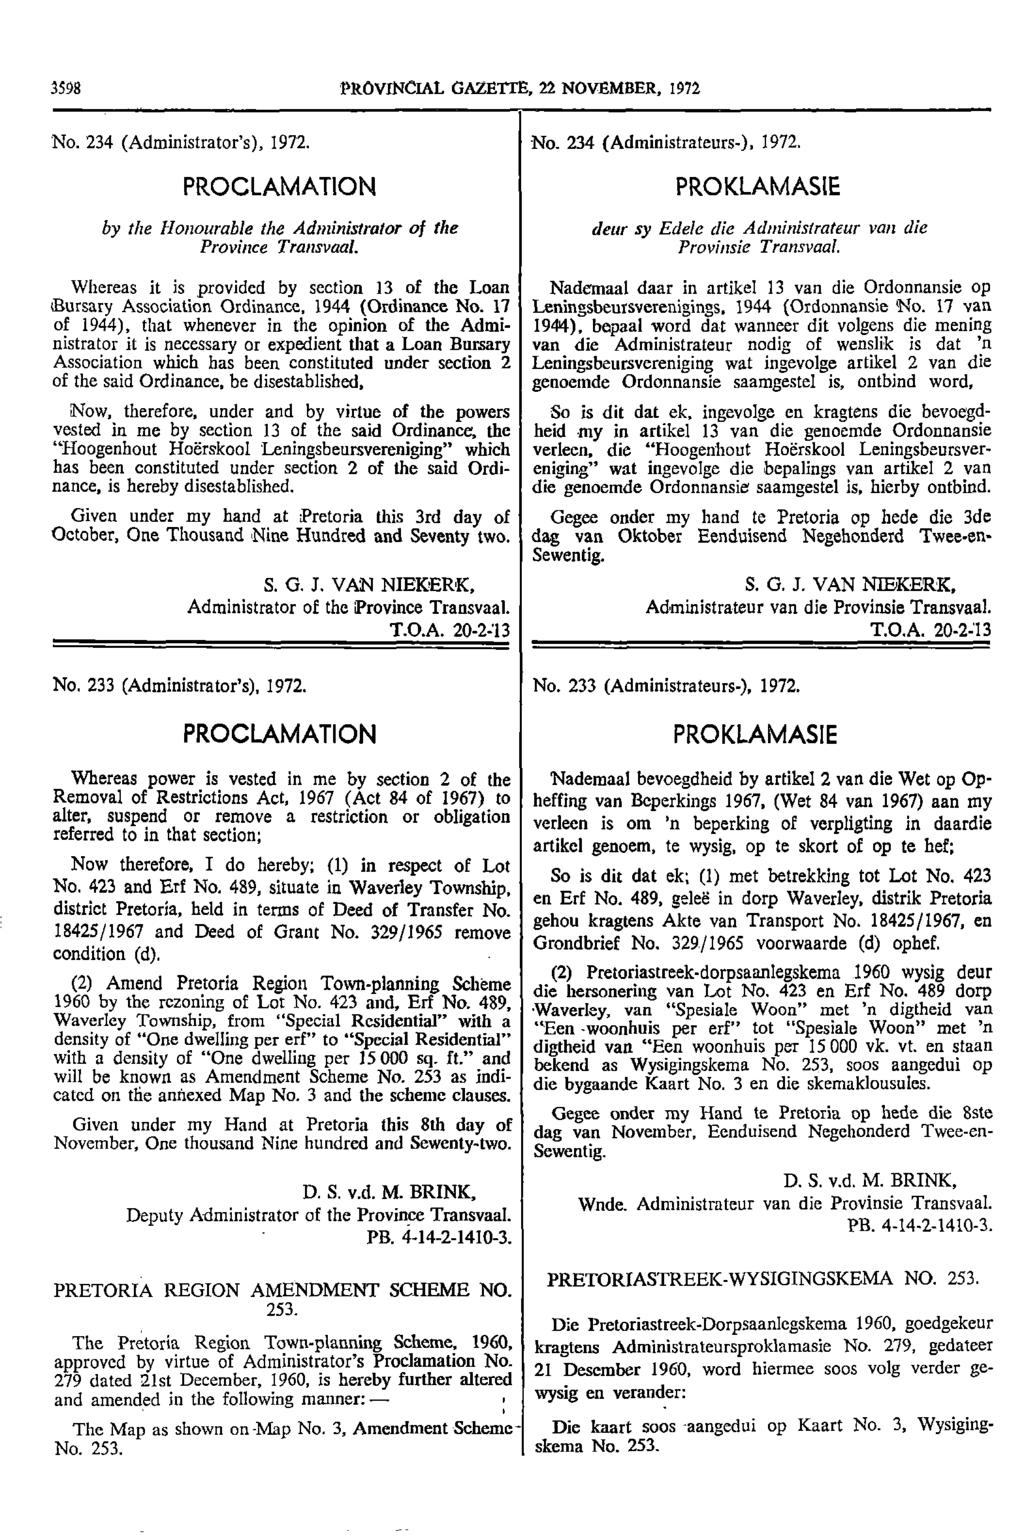 3598 PROVINCIAL GAZETTE, 22 NOVEMBER, 1972 No 234 (Administrator's), 1972 No 234 (Administrateurs) 1972 PROCLAMATION by the Honourable the Administrator of the Province Transvaal PROKLAMASIE deur sy